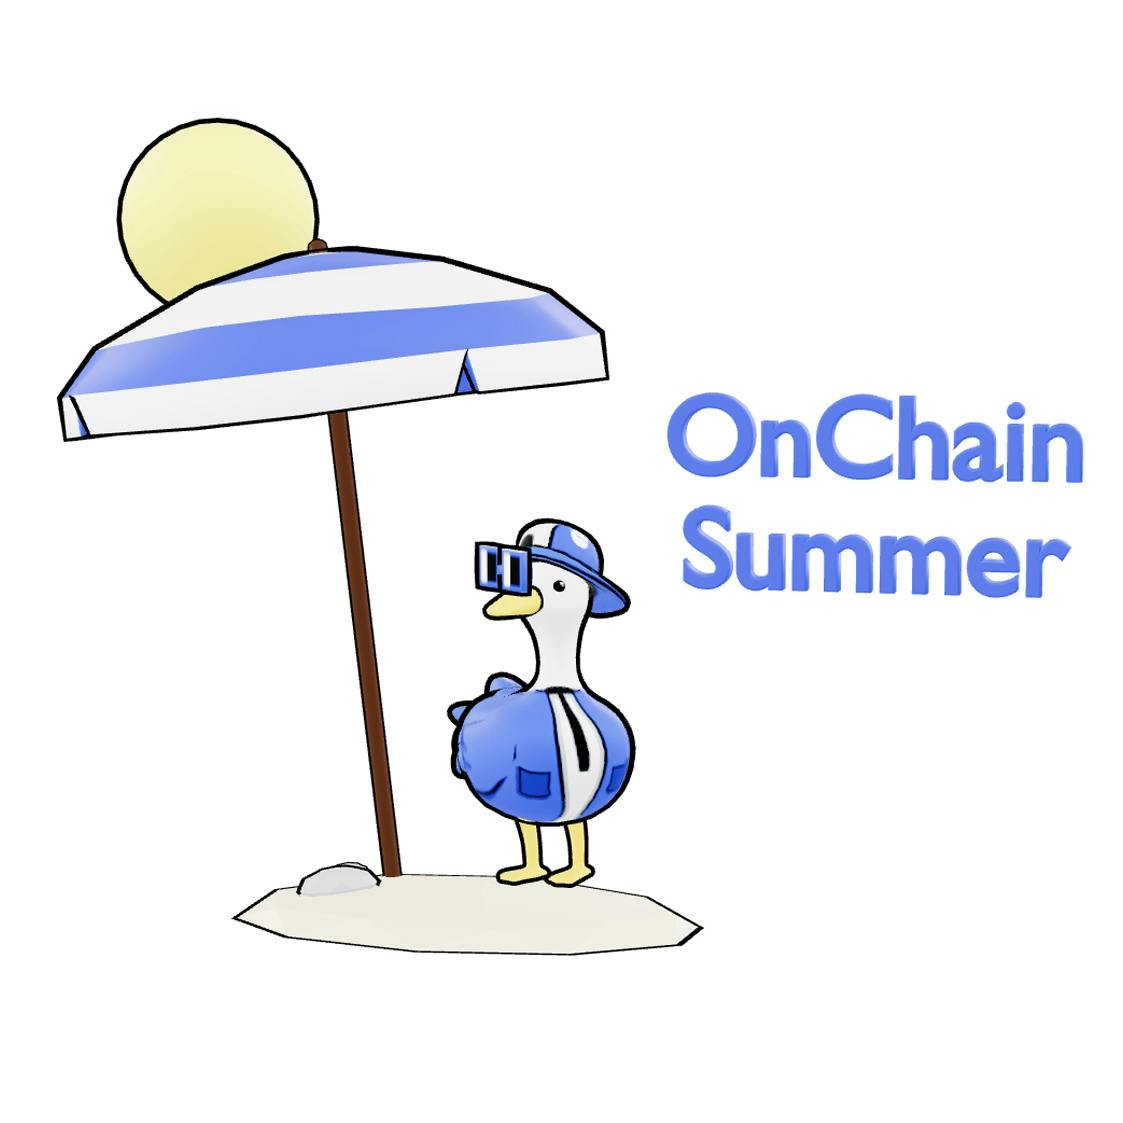 OnChain Summer is coming back!